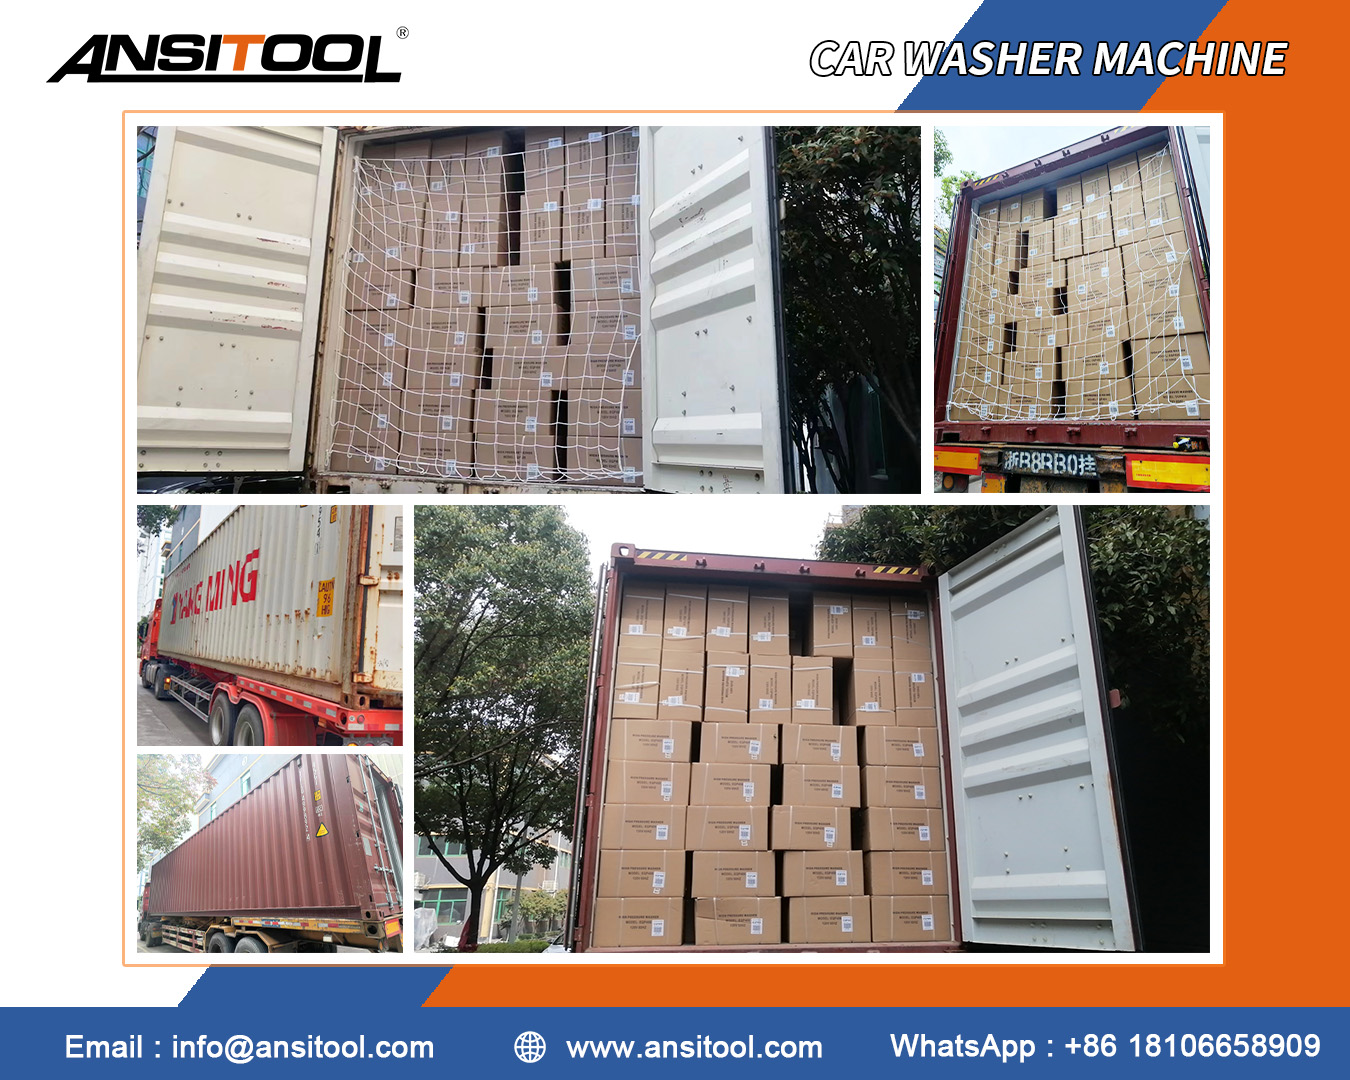 8,500 customized car washer machines have been sent to American customers!